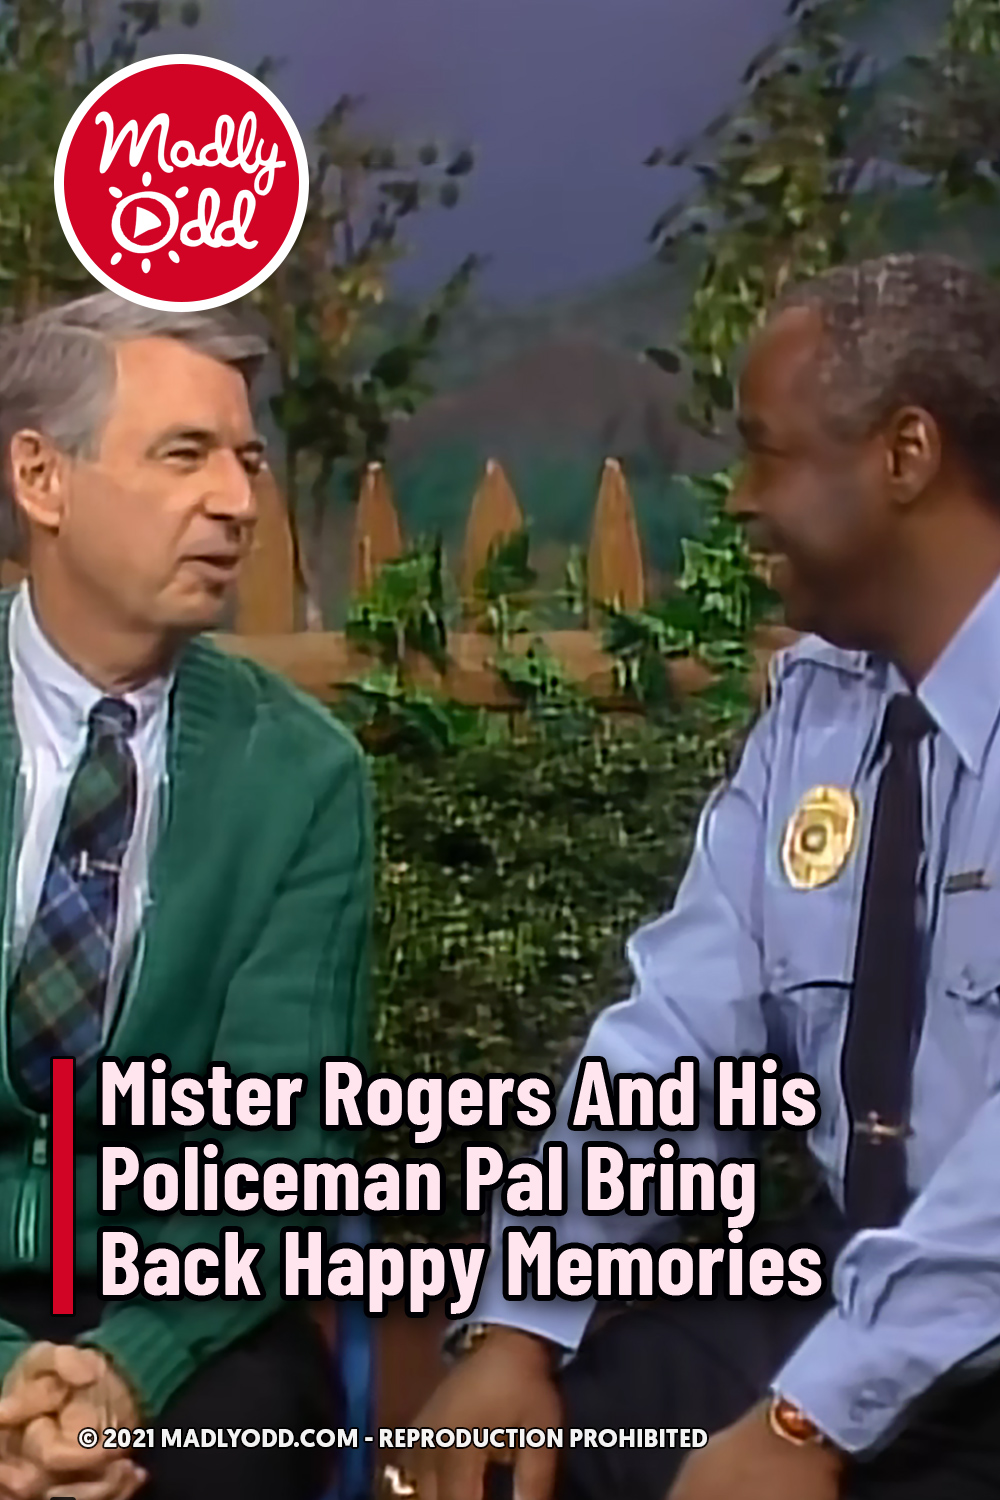 Mister Rogers And His Policeman Pal Bring Back Happy Memories